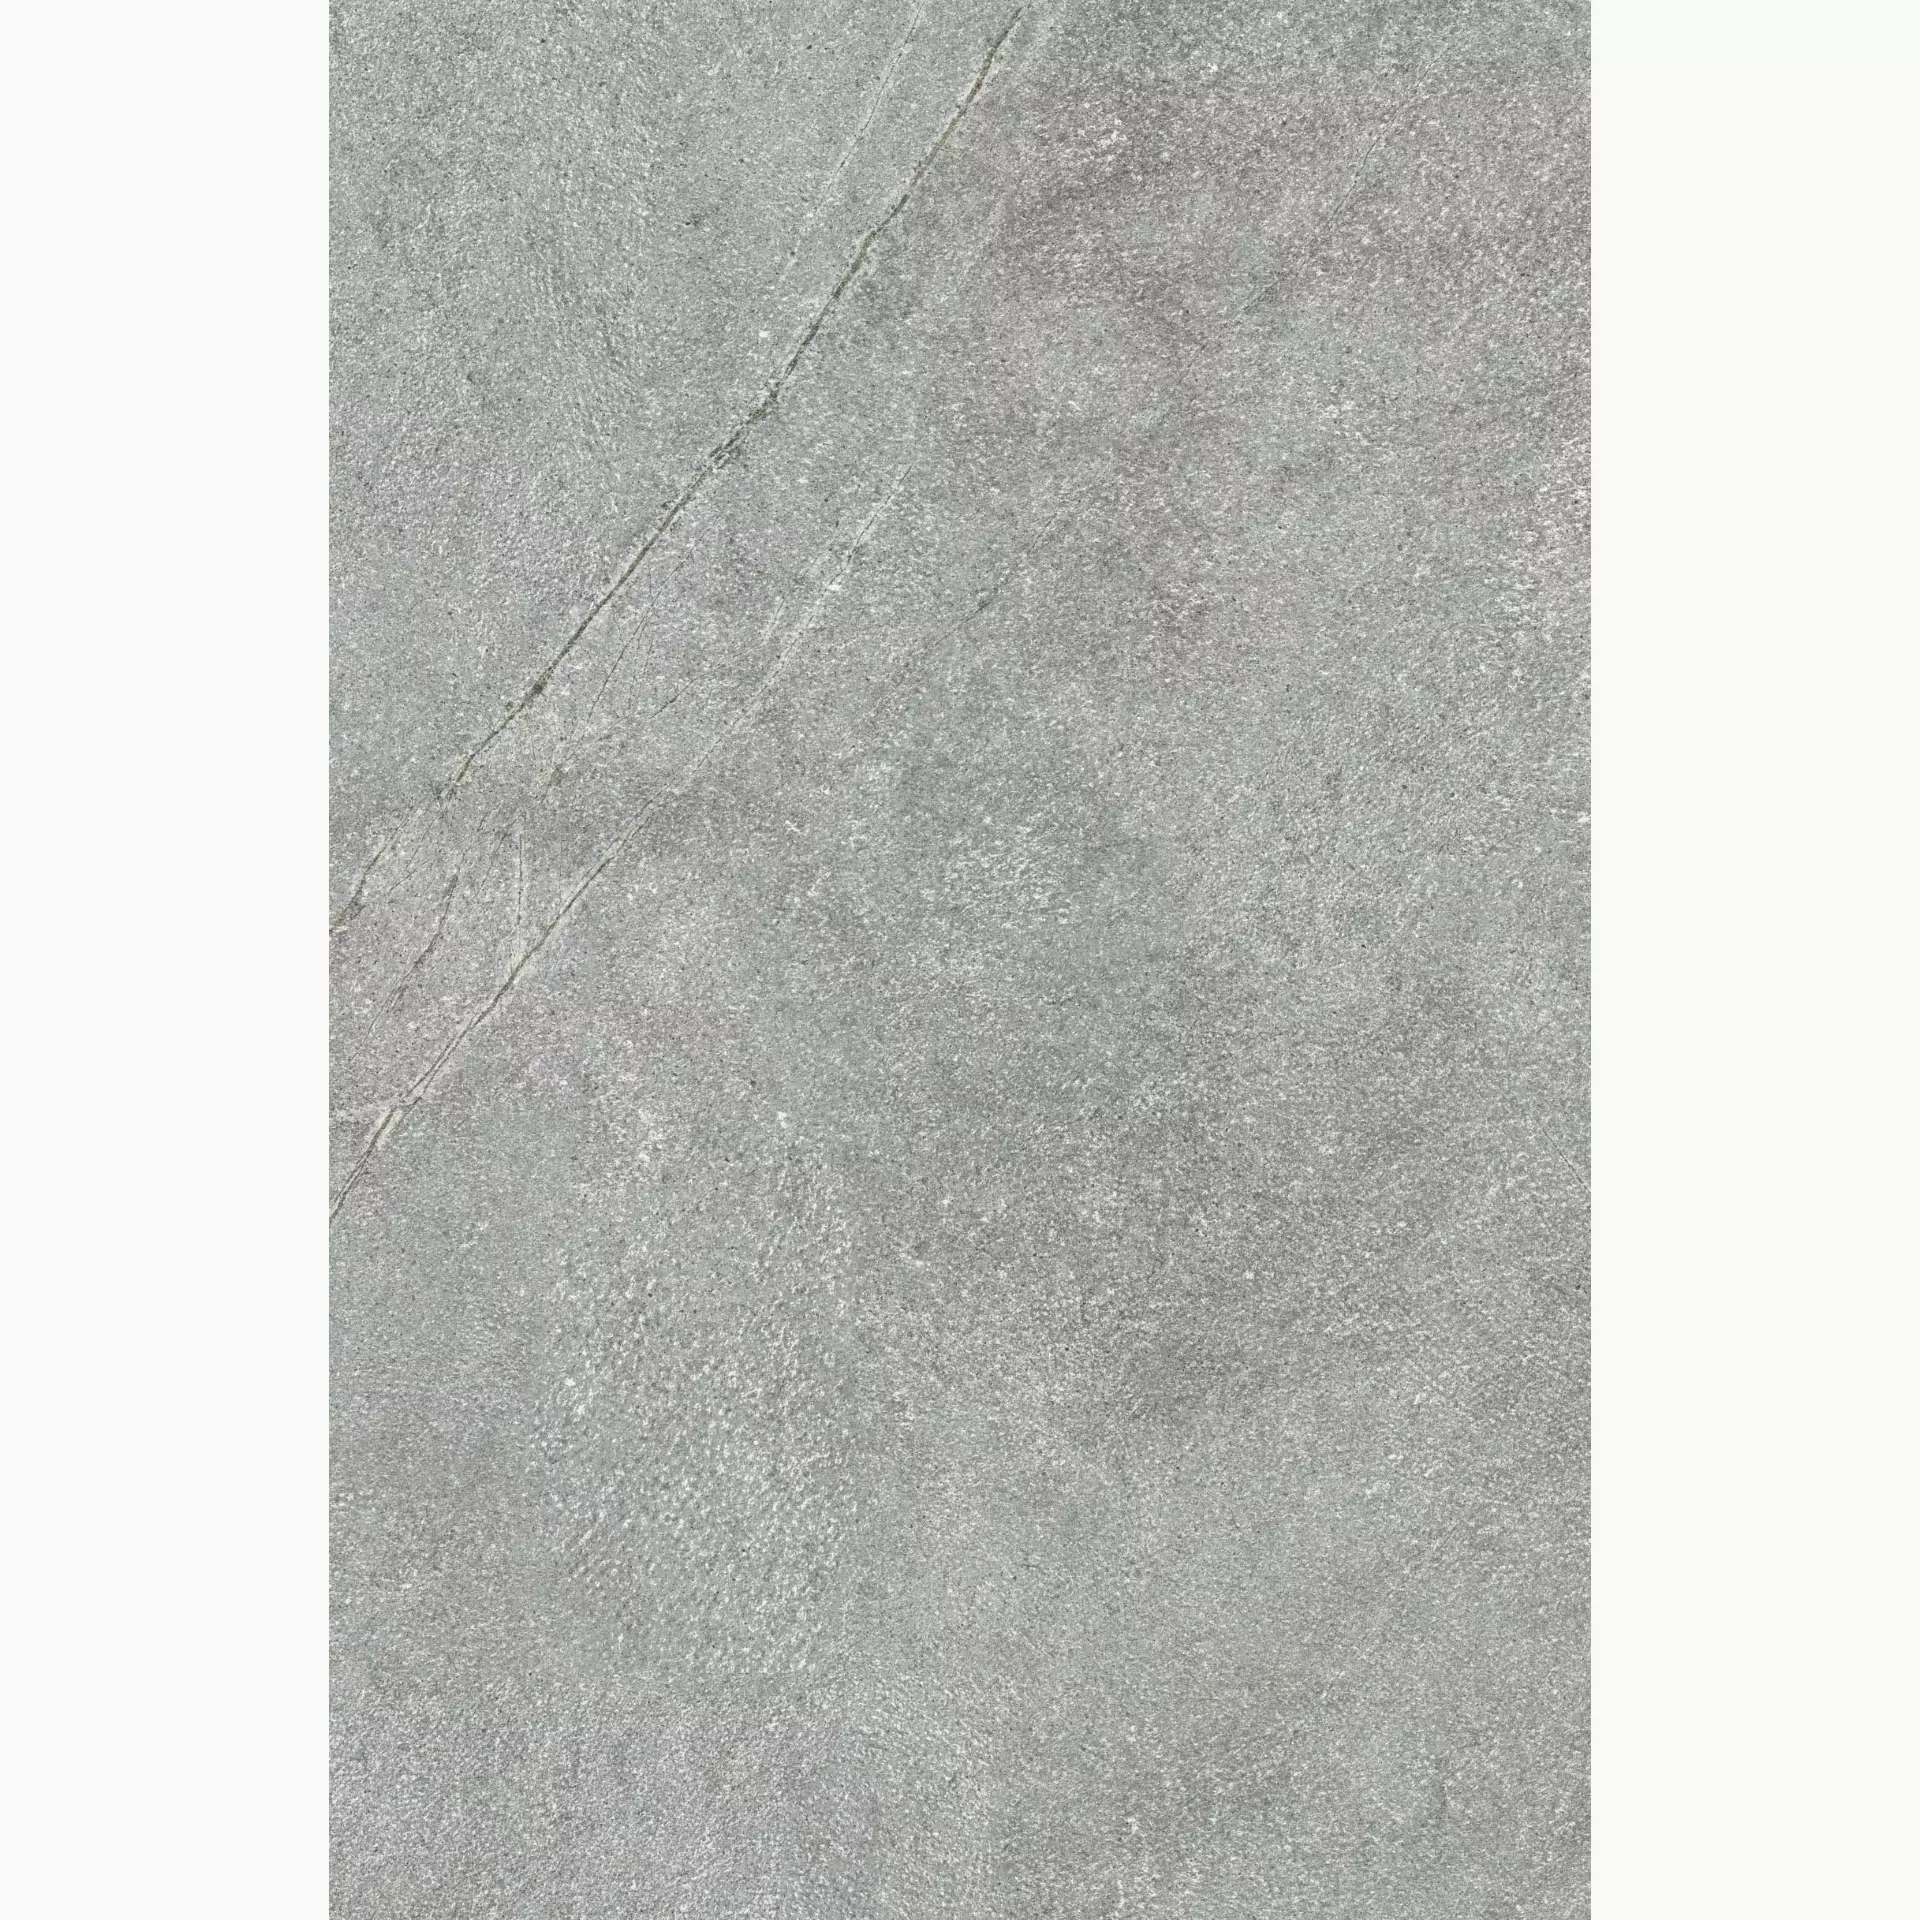 ABK Out.20 Atlantis Grey Hammered Outdoor PF60007174 60x90cm rectified 20mm